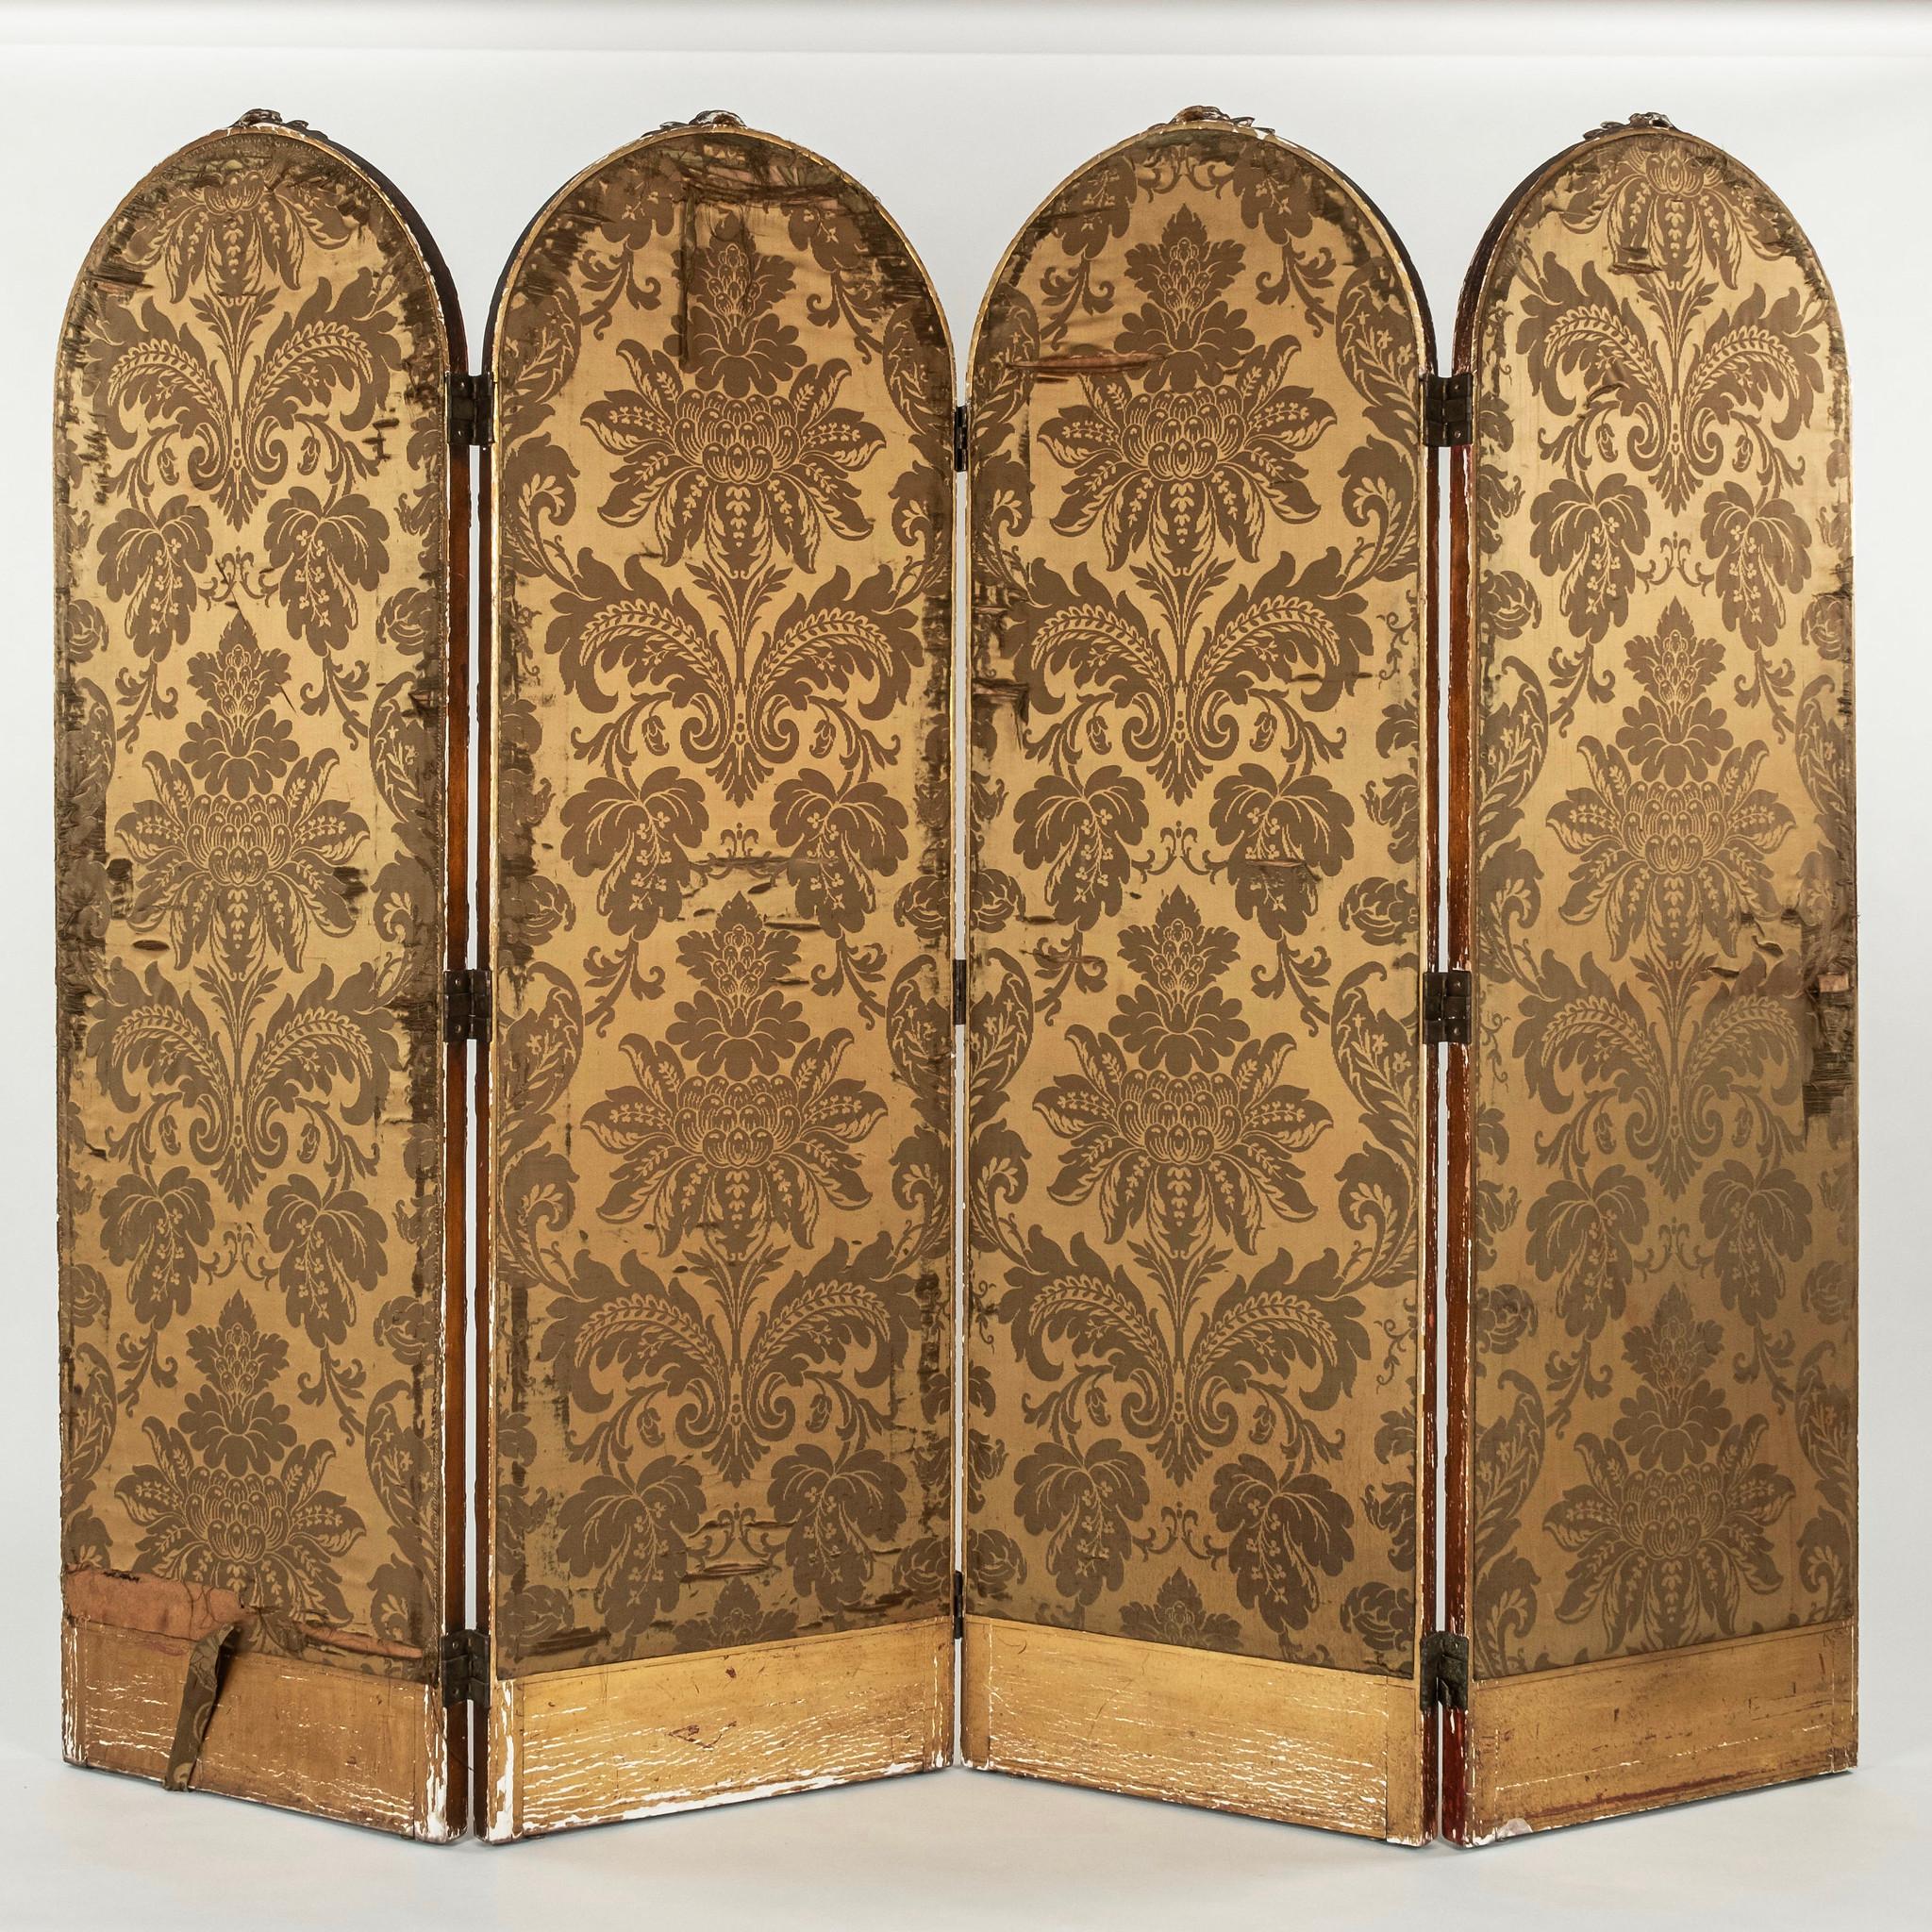 A lovely 19th Century French giltwood folding screen painted in the Chinoiserie style and backed in silk.